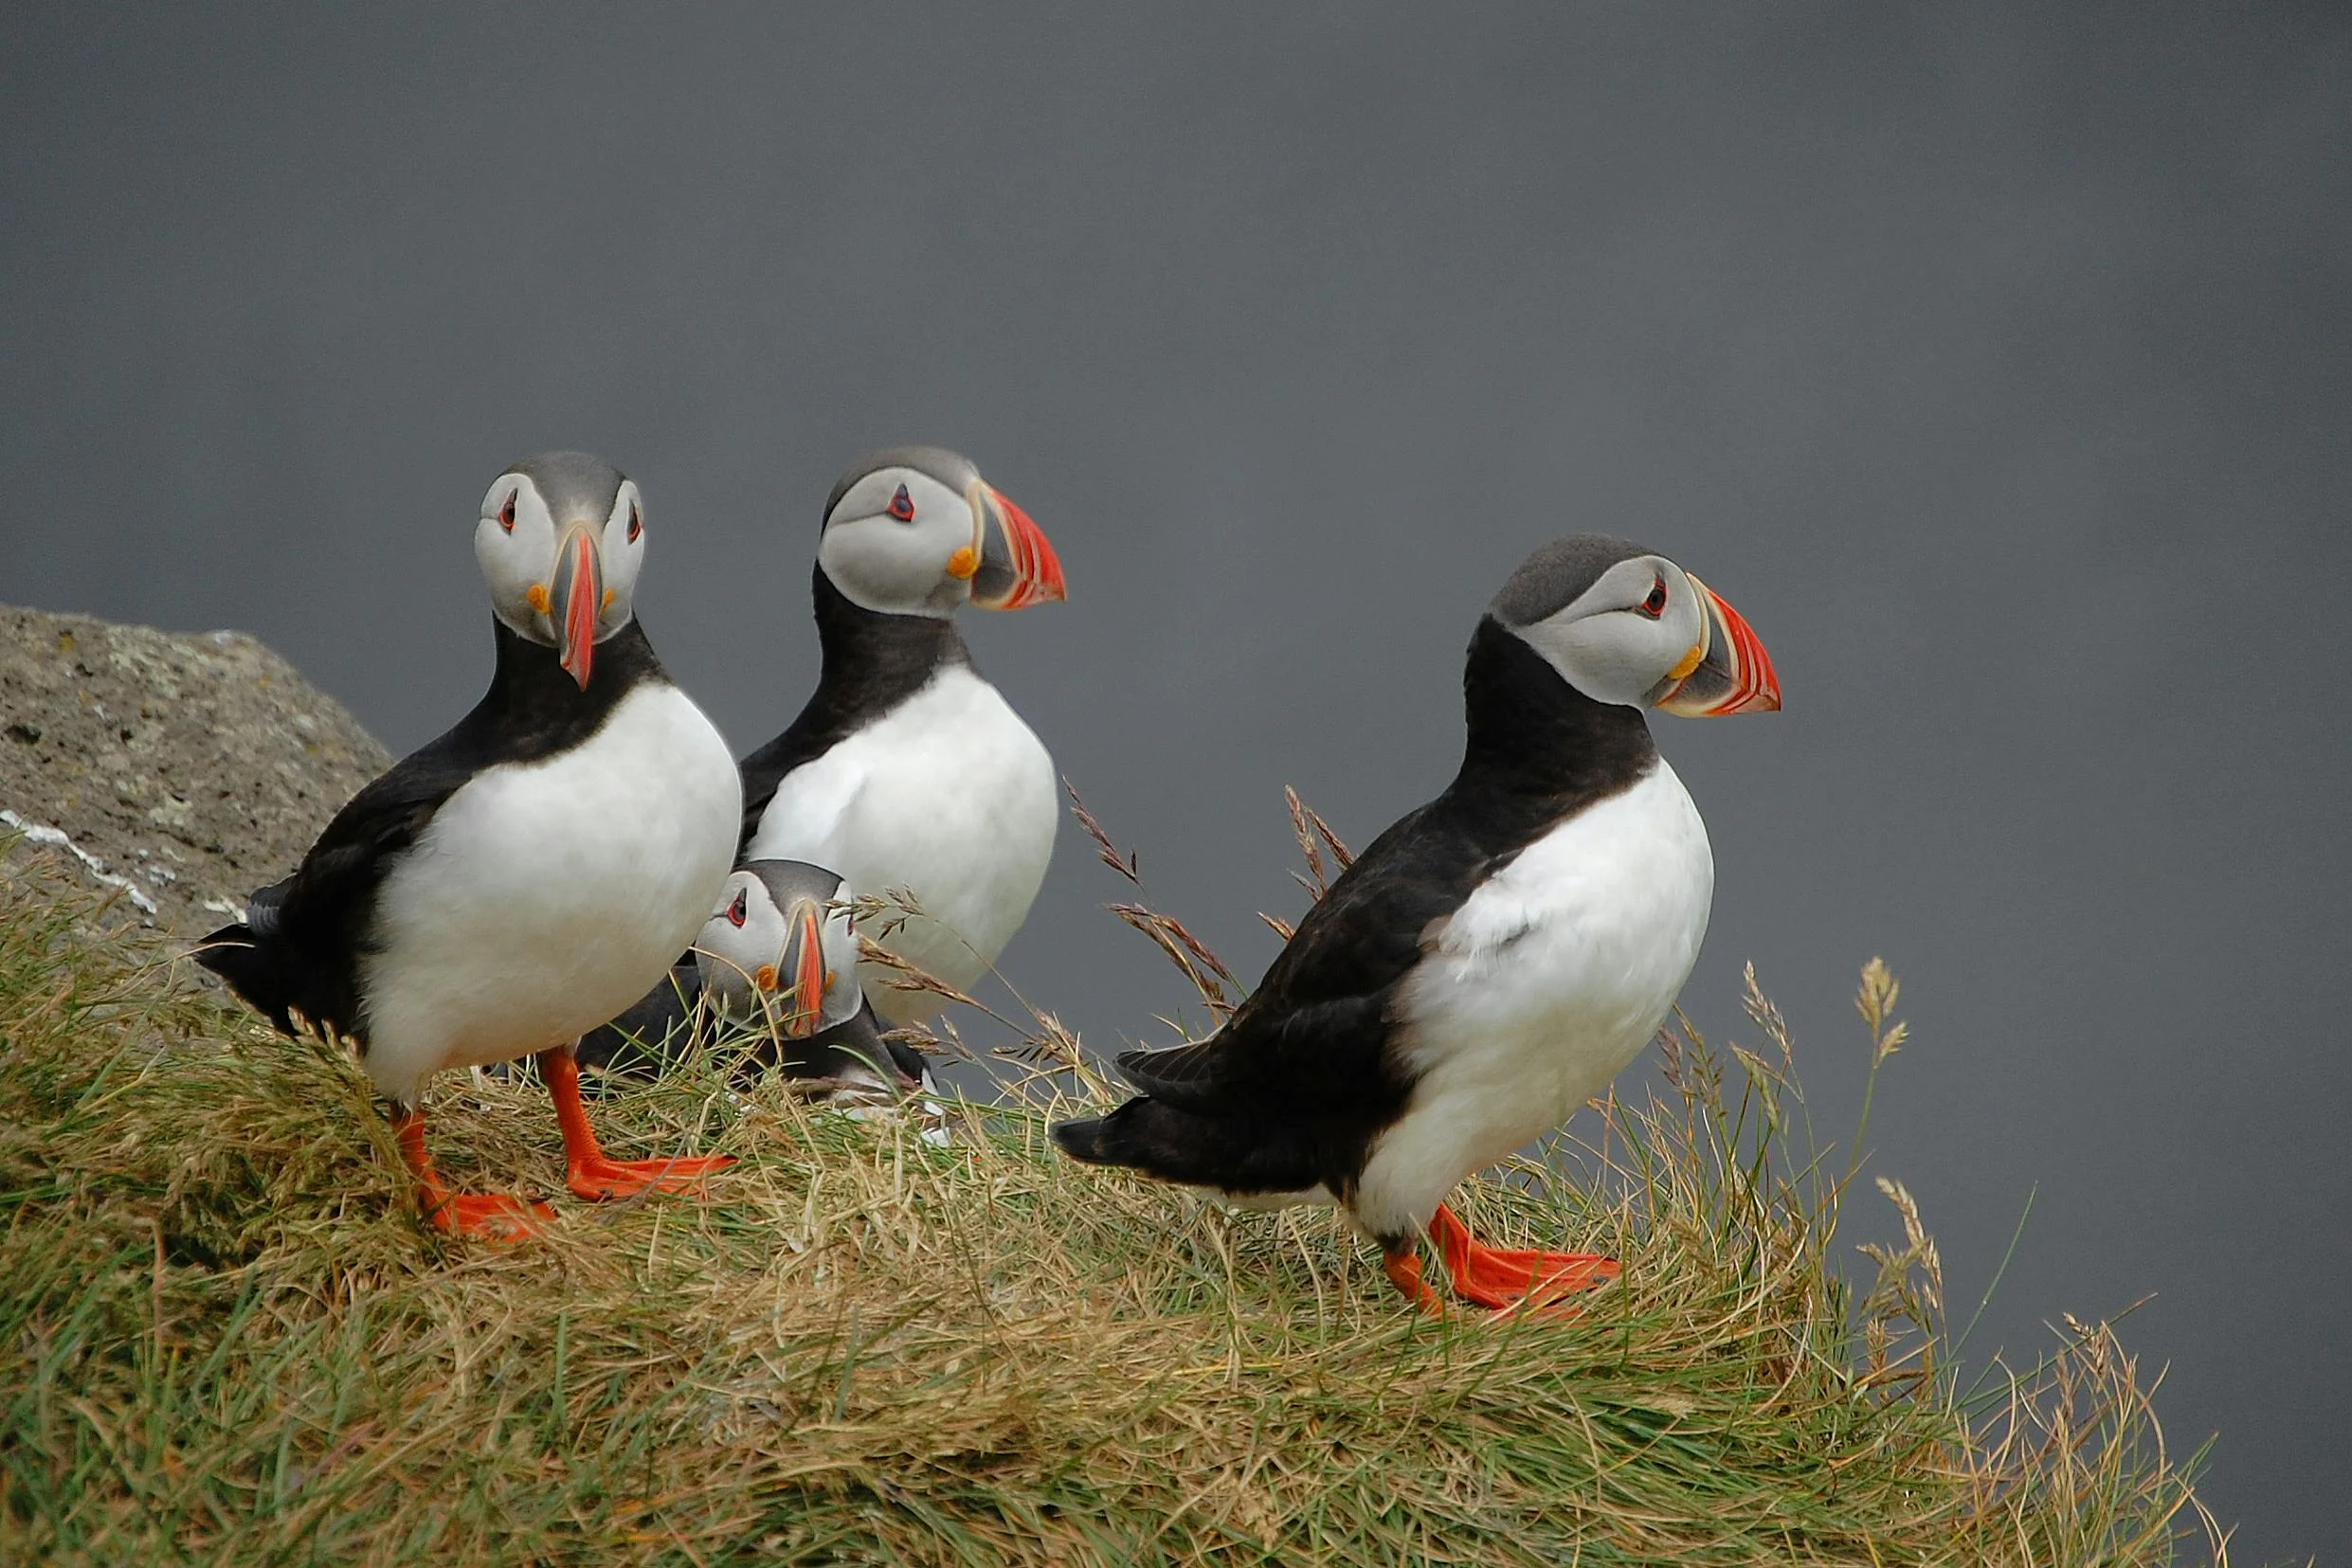 Four Puffins look around and assess their surroundings. There are several good places to see puffins in Ireland.